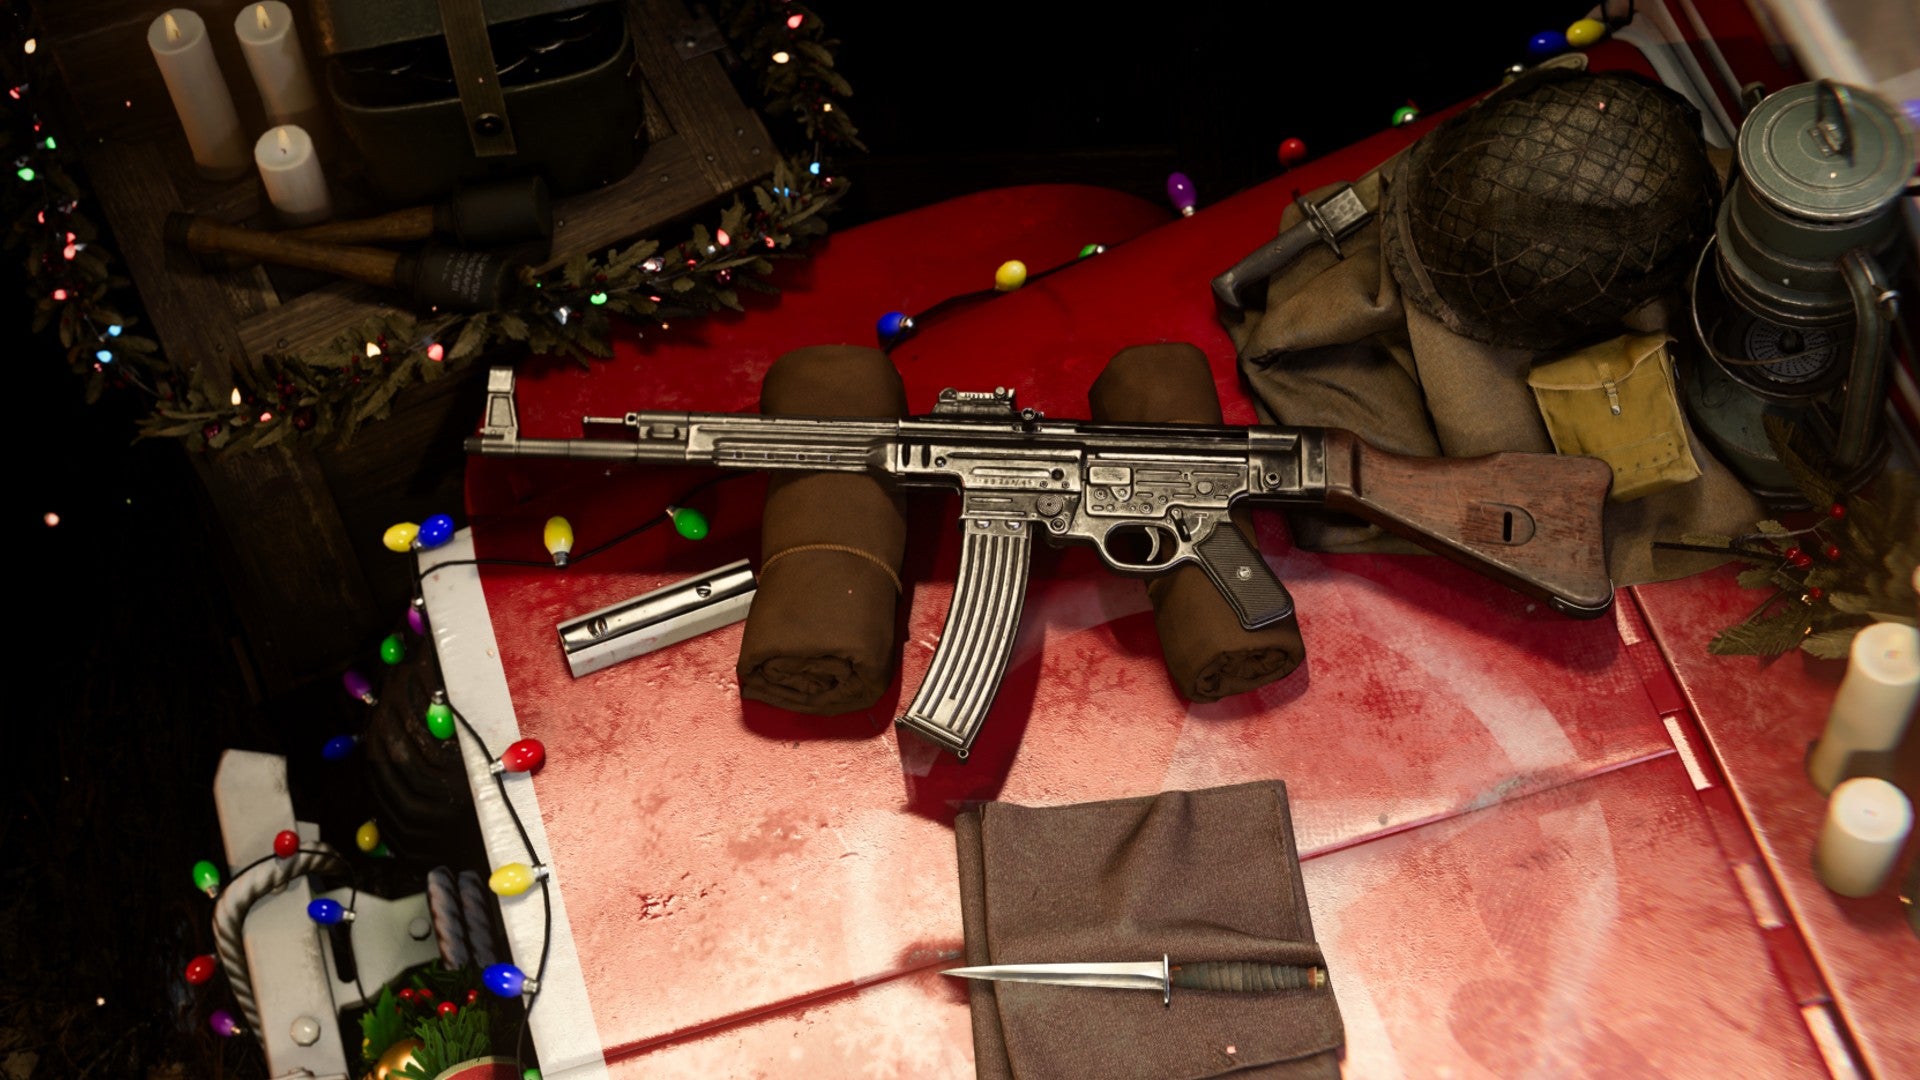 Vanguard STG44 in the loadout menu on a crate, surrounded by Christmas decorations and festive lights